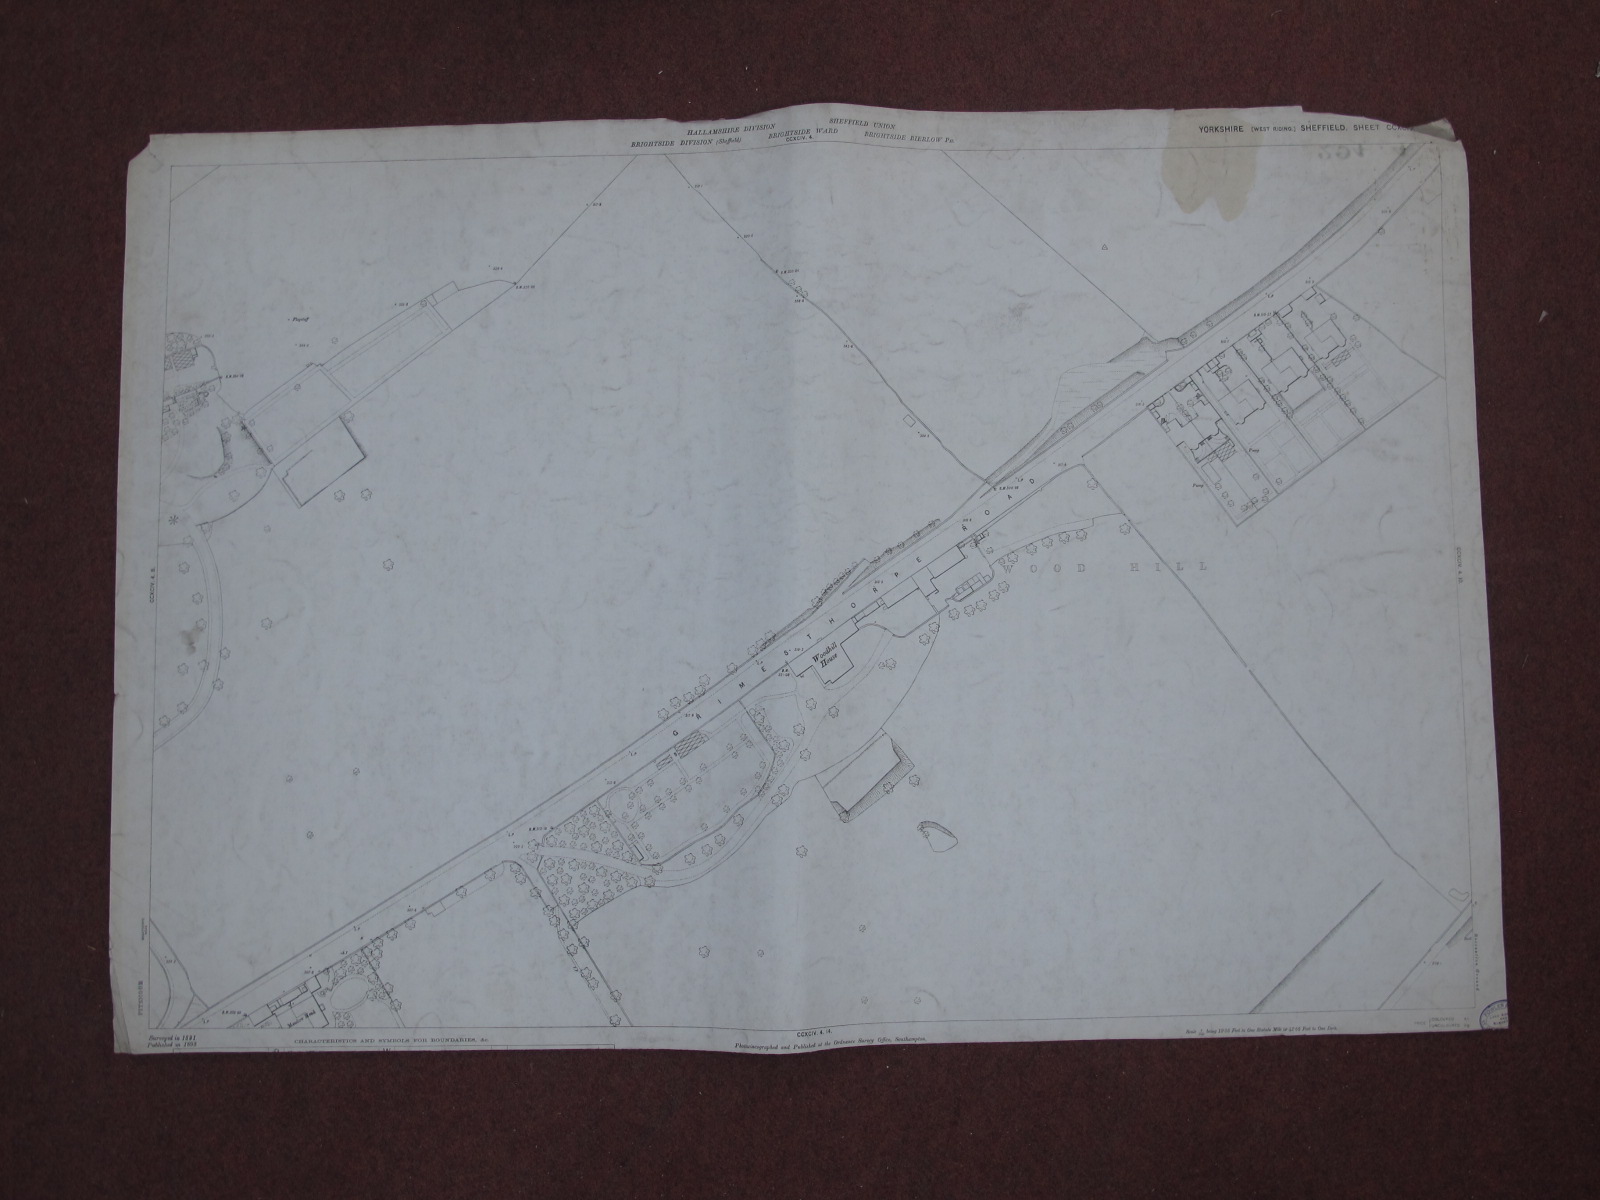 Sheffield Maps, Brightside, Burngreave - some dates noted, 1893, 1890, various scales, dirty and - Image 3 of 10